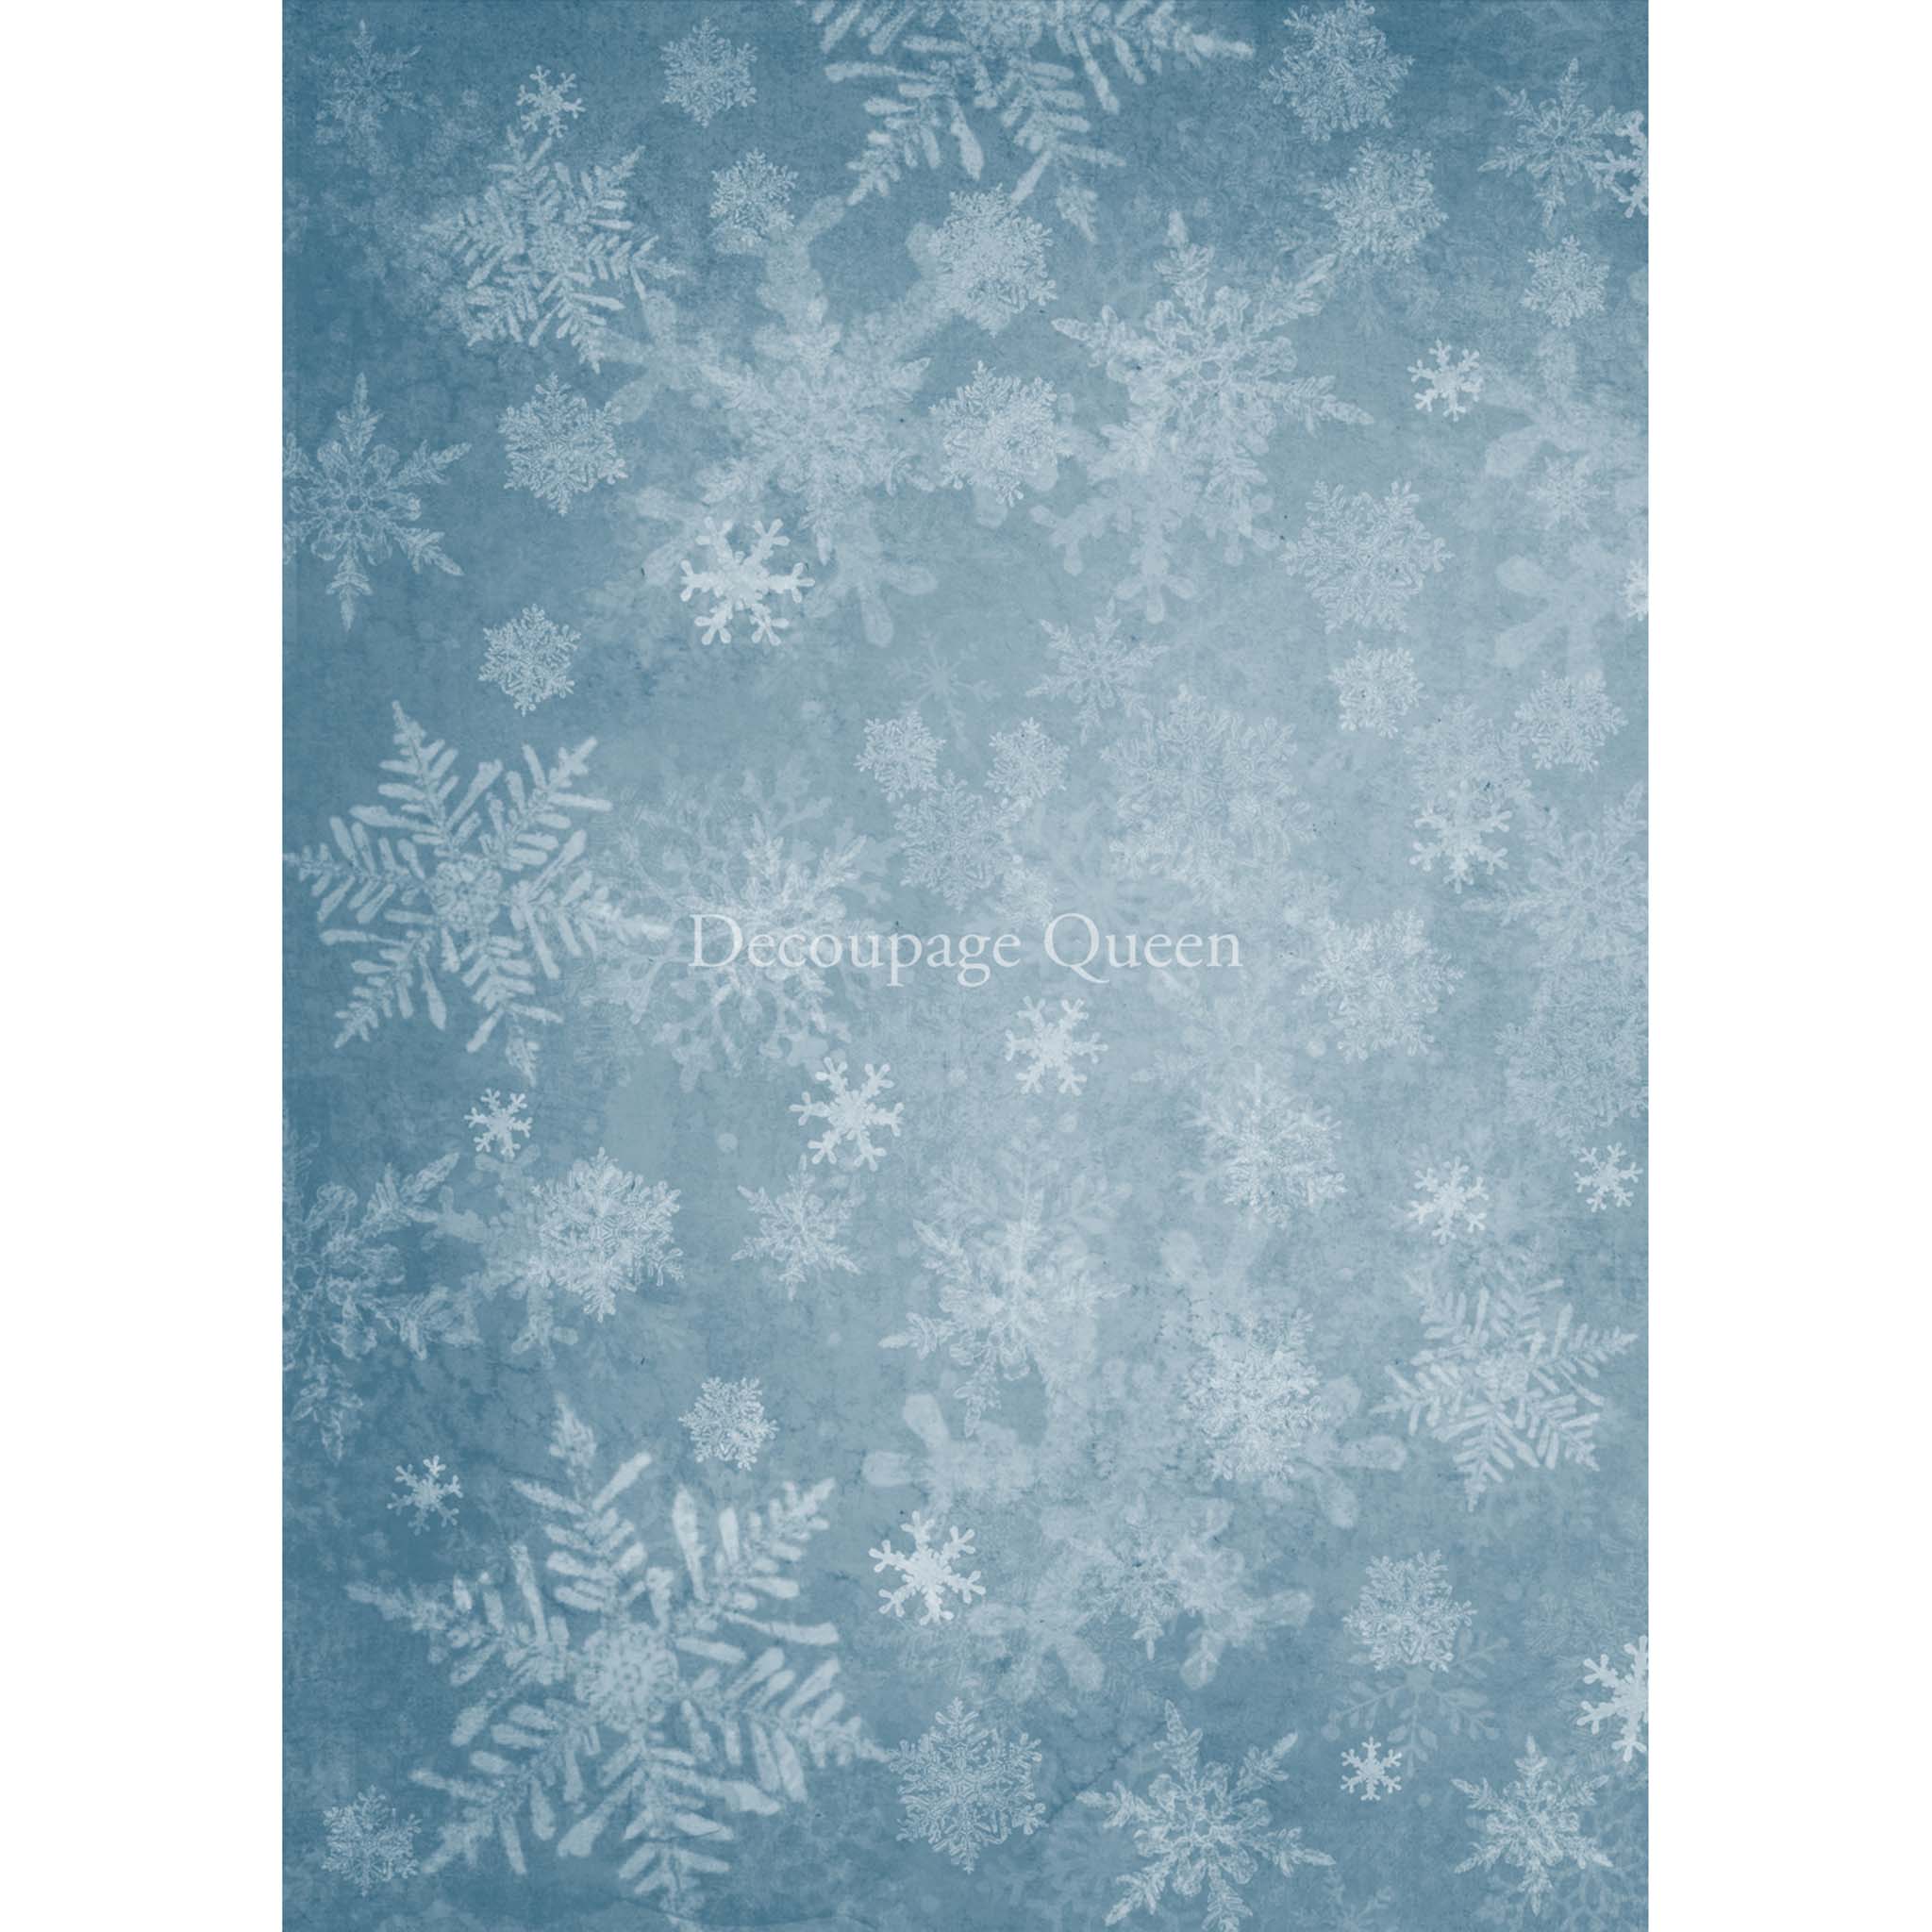 A4 rice paper design featuring a beautiful winter blue background full of snowflakes. White borders are on both sides.